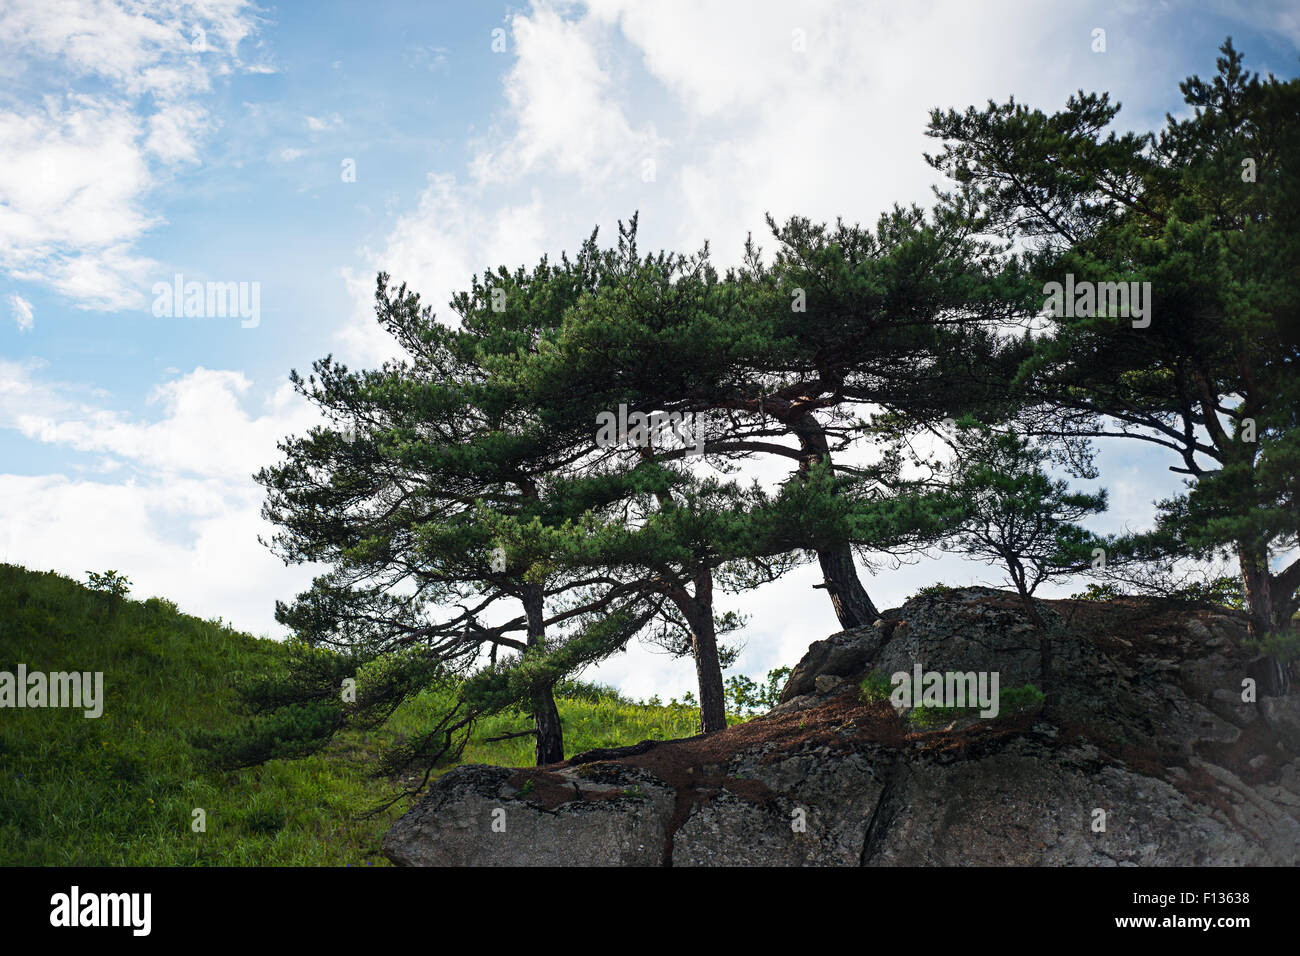 Beautiful landscape with rocks and groves of relict Pinus densiflora Siebold et Zucc. Japanese Sea. South of Primorsky Krai. Vla Stock Photo